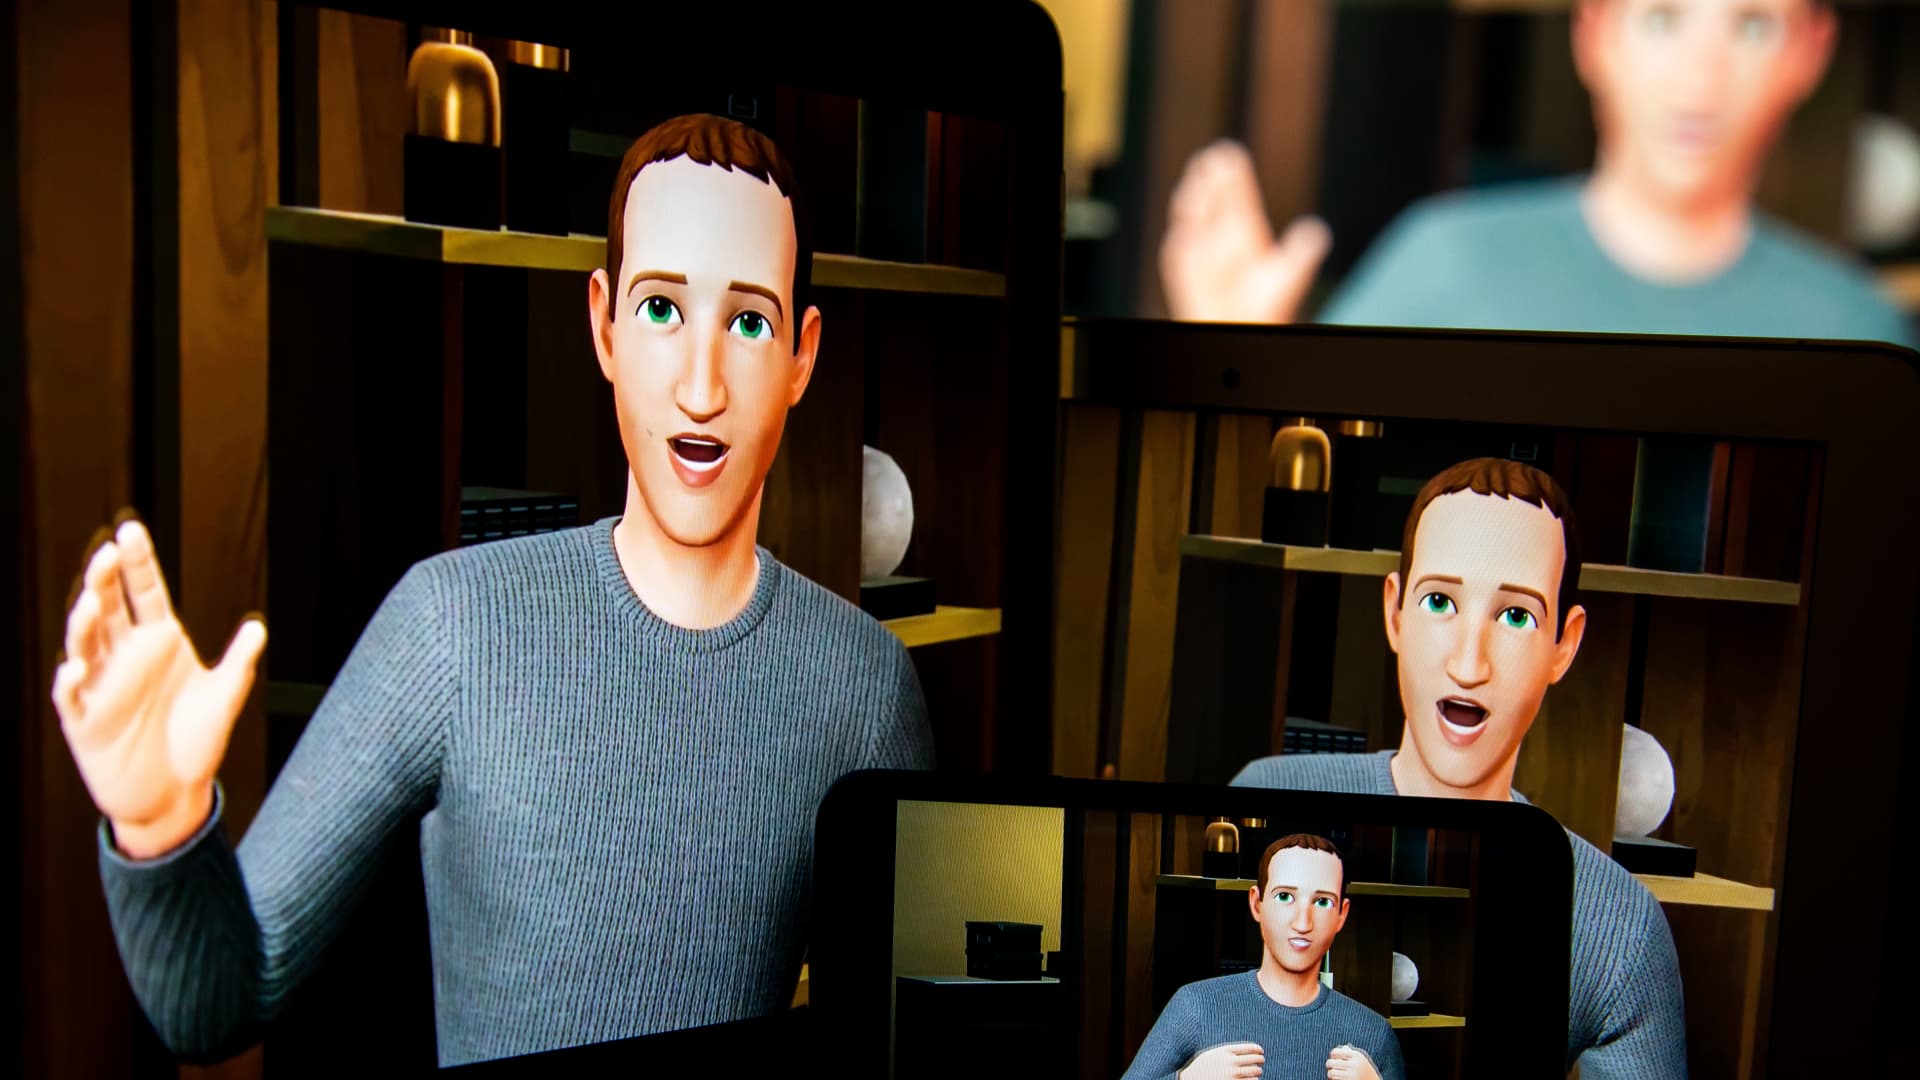 An avatar of Meta Platforms Inc. CEO Mark Zuckerberg speaks during the virtual Meta Connect event in New York, U.S., Tuesday, October 11, 2022.